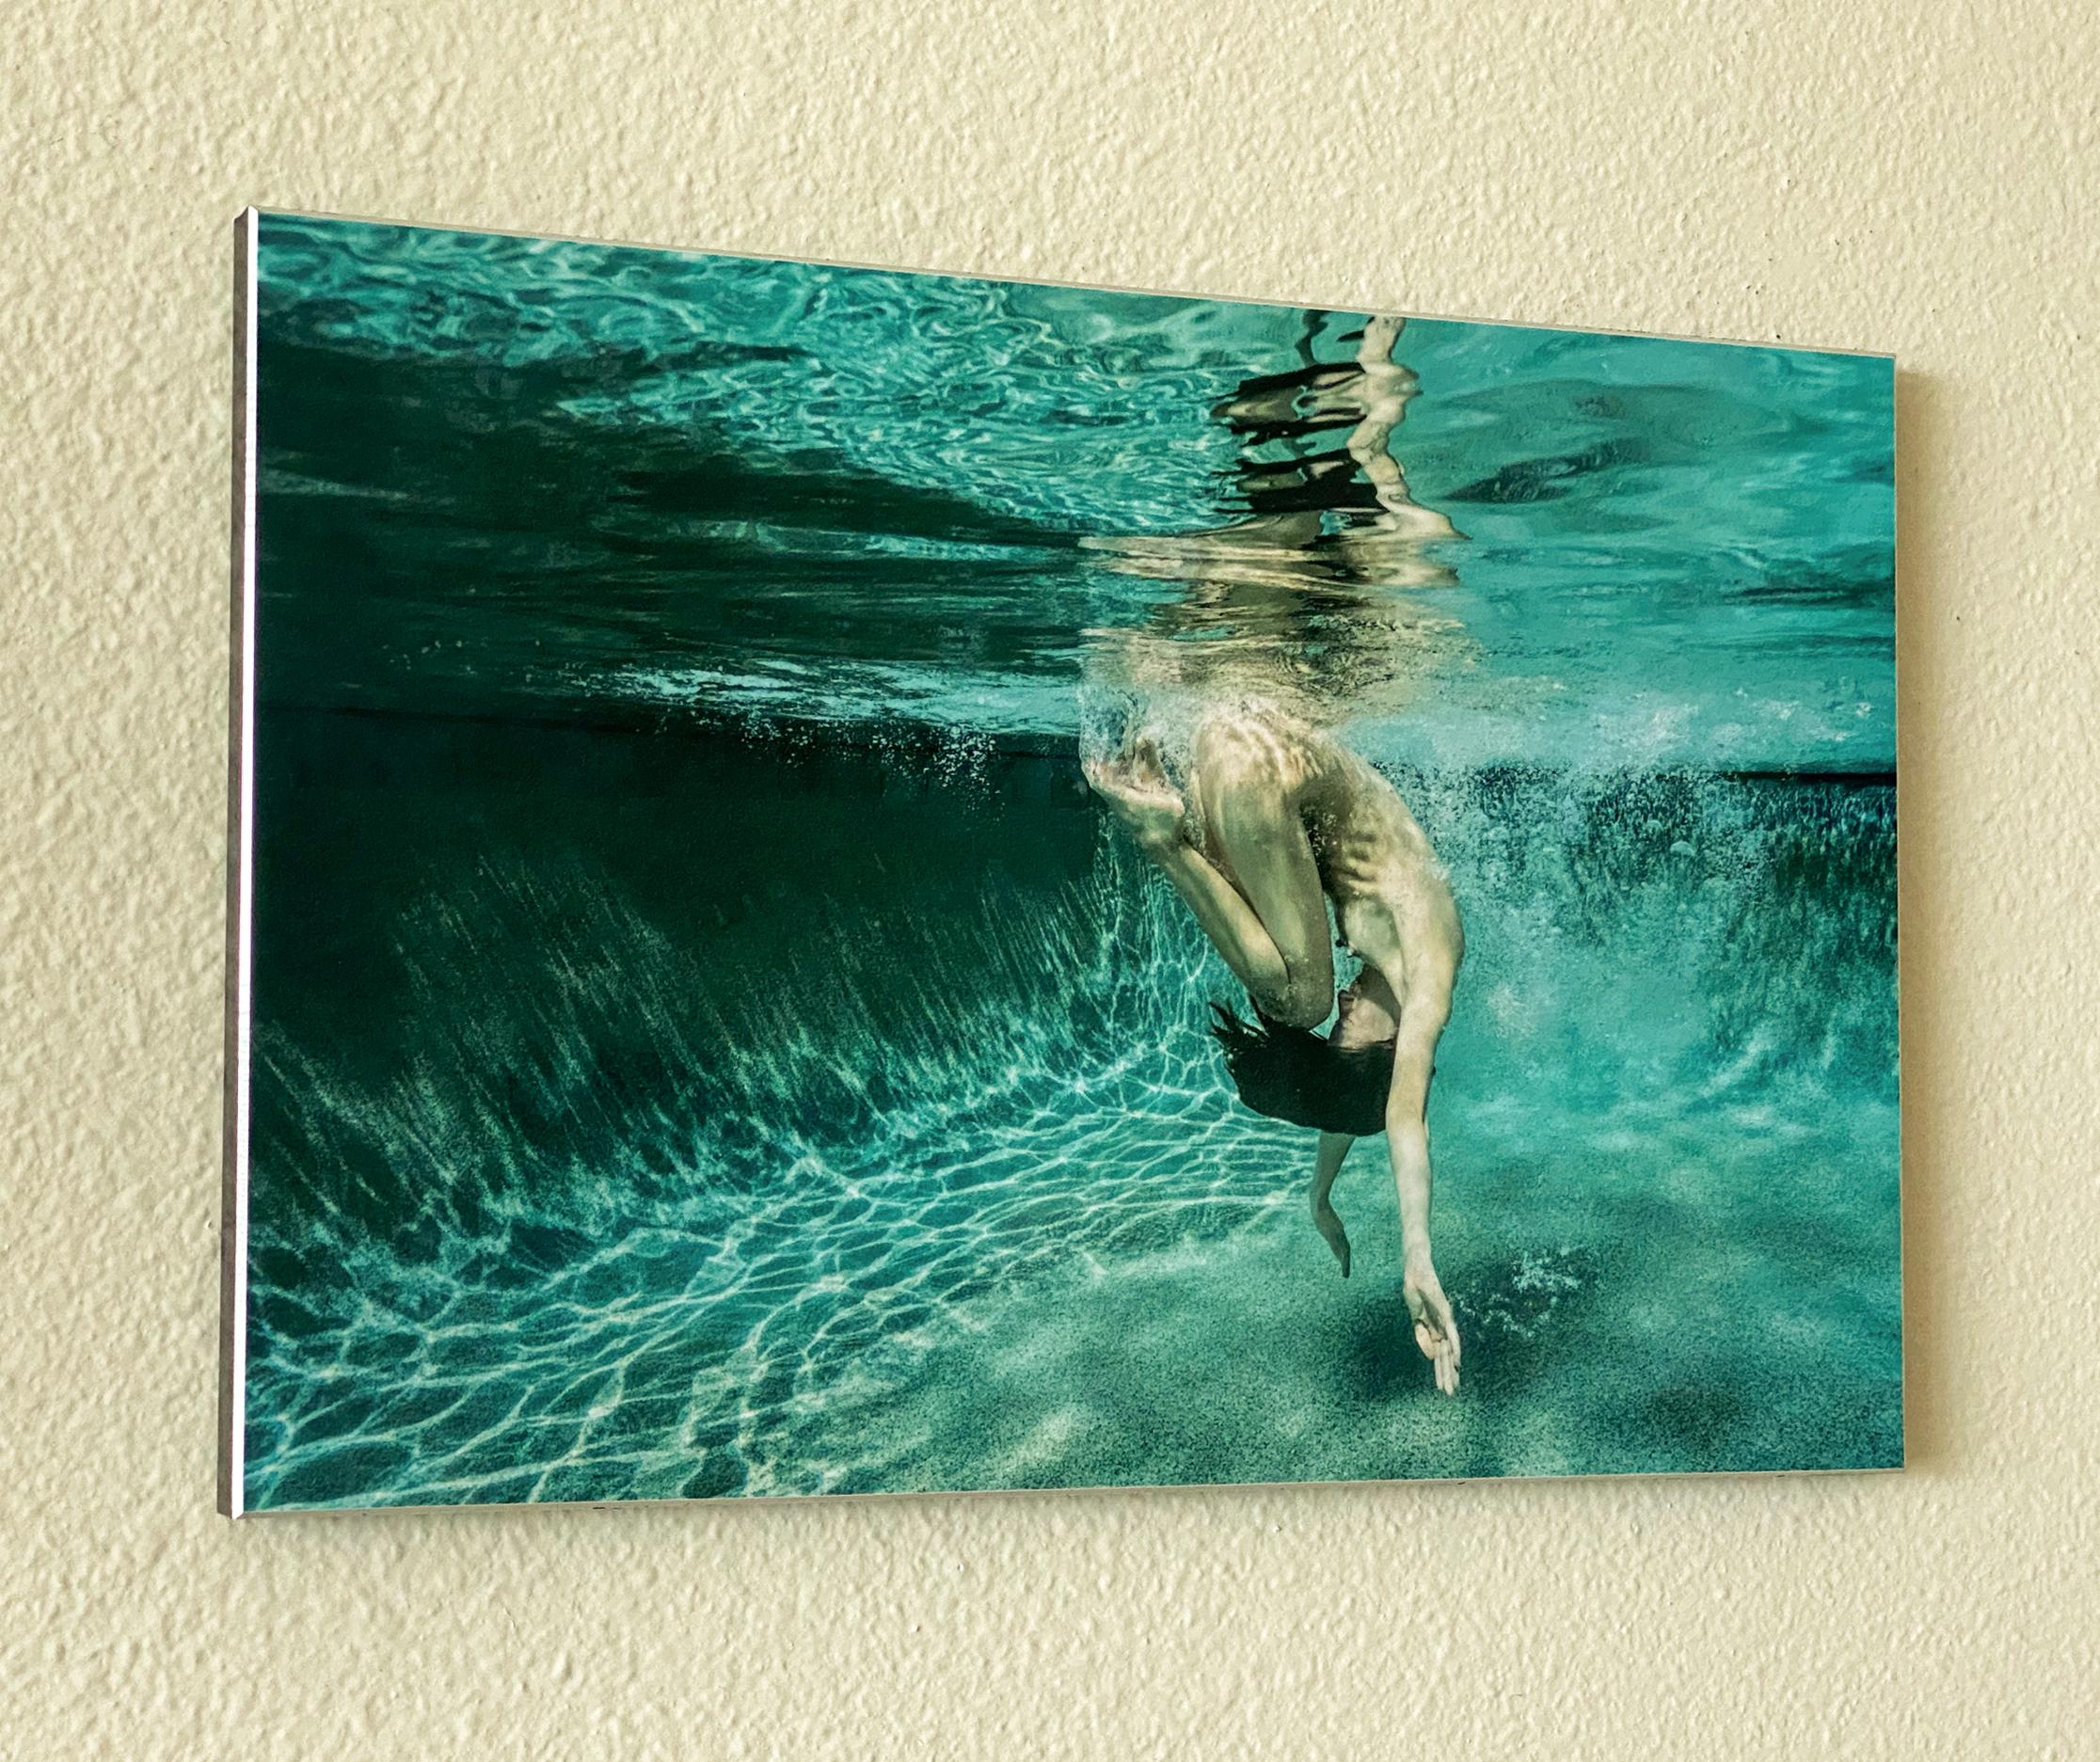 The series Green Roll is an underwater photograph of a naked young woman diving (rolling) in a pool. This extremely dynamic photograph is rich in green tones looks abstract while in fact it is entirely figurative.

Each photograph can be purchased